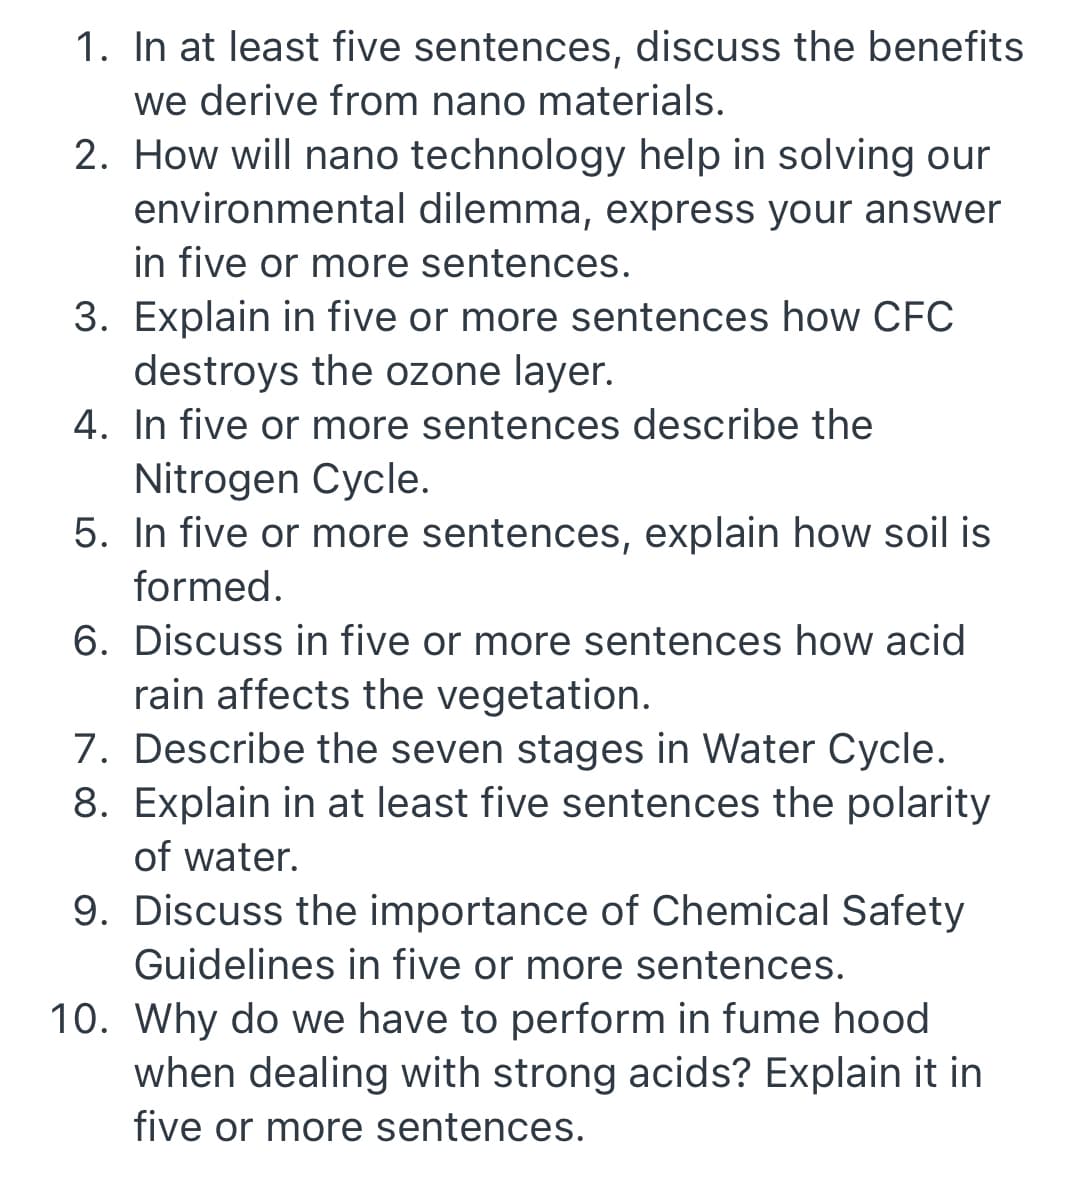 1. In at least five sentences, discuss the benefits
we derive from nano materials.
2. How will nano technology help in solving our
environmental dilemma, express your answer
in five or more sentences.
3. Explain in five or more sentences how CFC
destroys the ozone layer.
4. In five or more sentences describe the
Nitrogen Cycle.
5. In five or more sentences, explain how soil is
formed.
6. Discuss in five or more sentences how acid
rain affects the vegetation.
7. Describe the seven stages in Water Cycle.
8. Explain in at least five sentences the polarity
of water.
9. Discuss the importance of Chemical Safety
Guidelines in five or more sentences.
10. Why do we have to perform in fume hood
when dealing with strong acids? Explain it in
five or more sentences.
